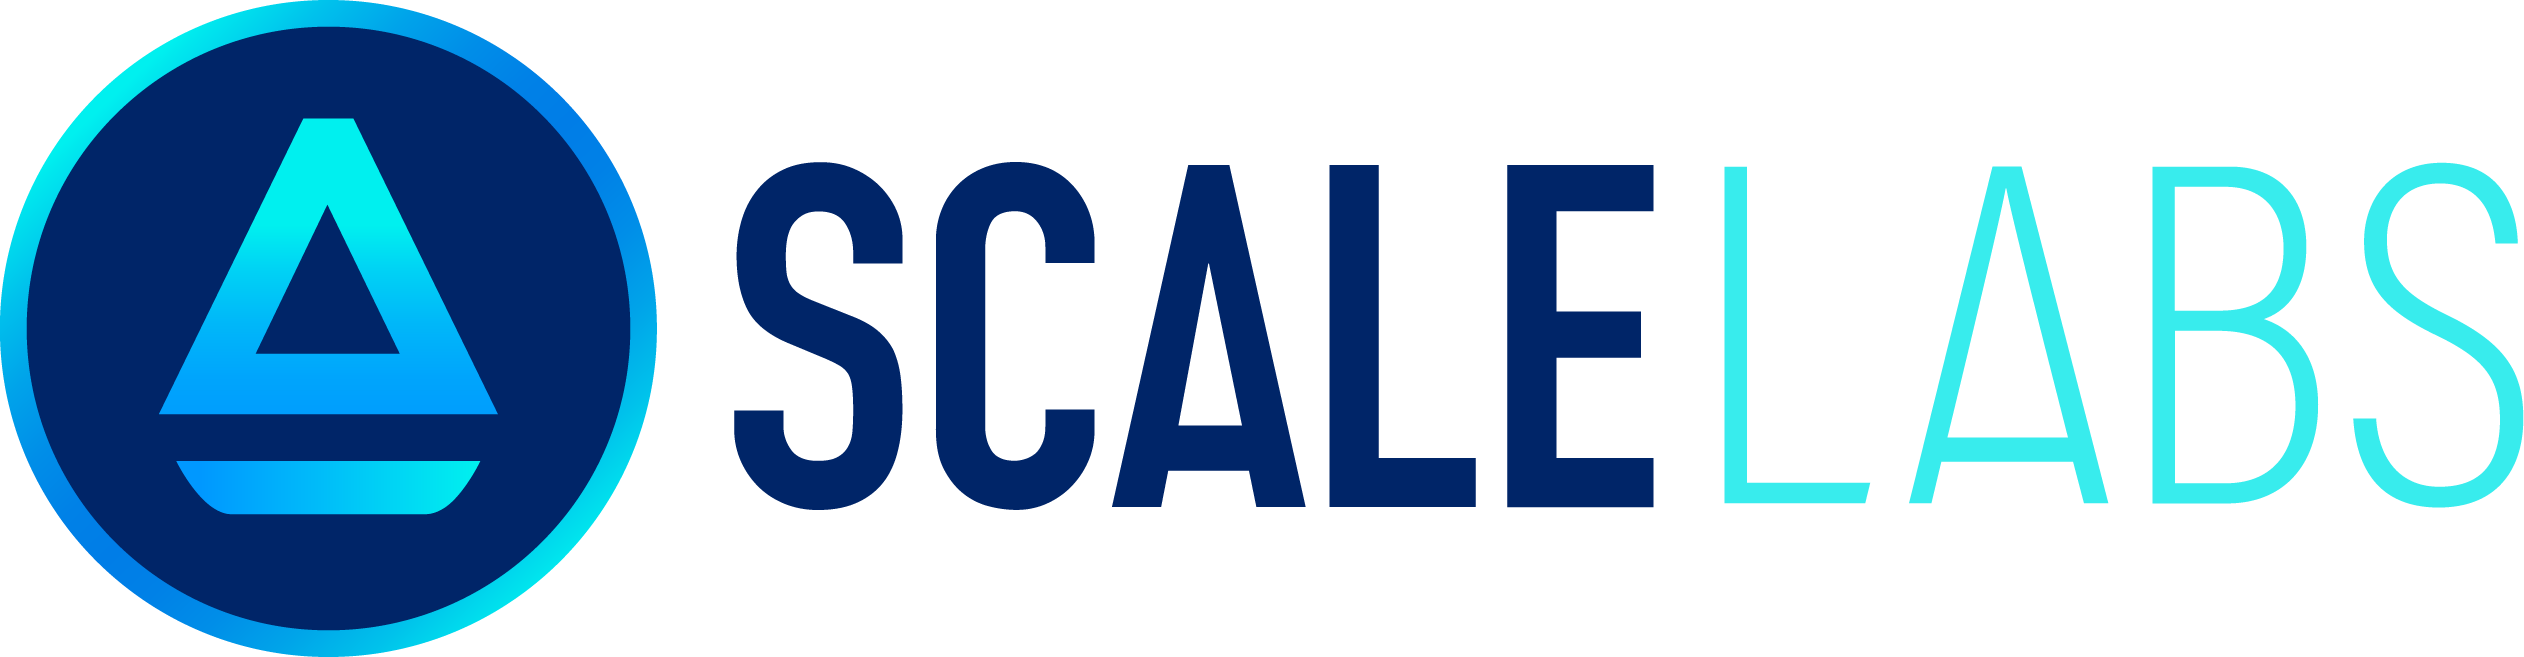 Scale Labs logo